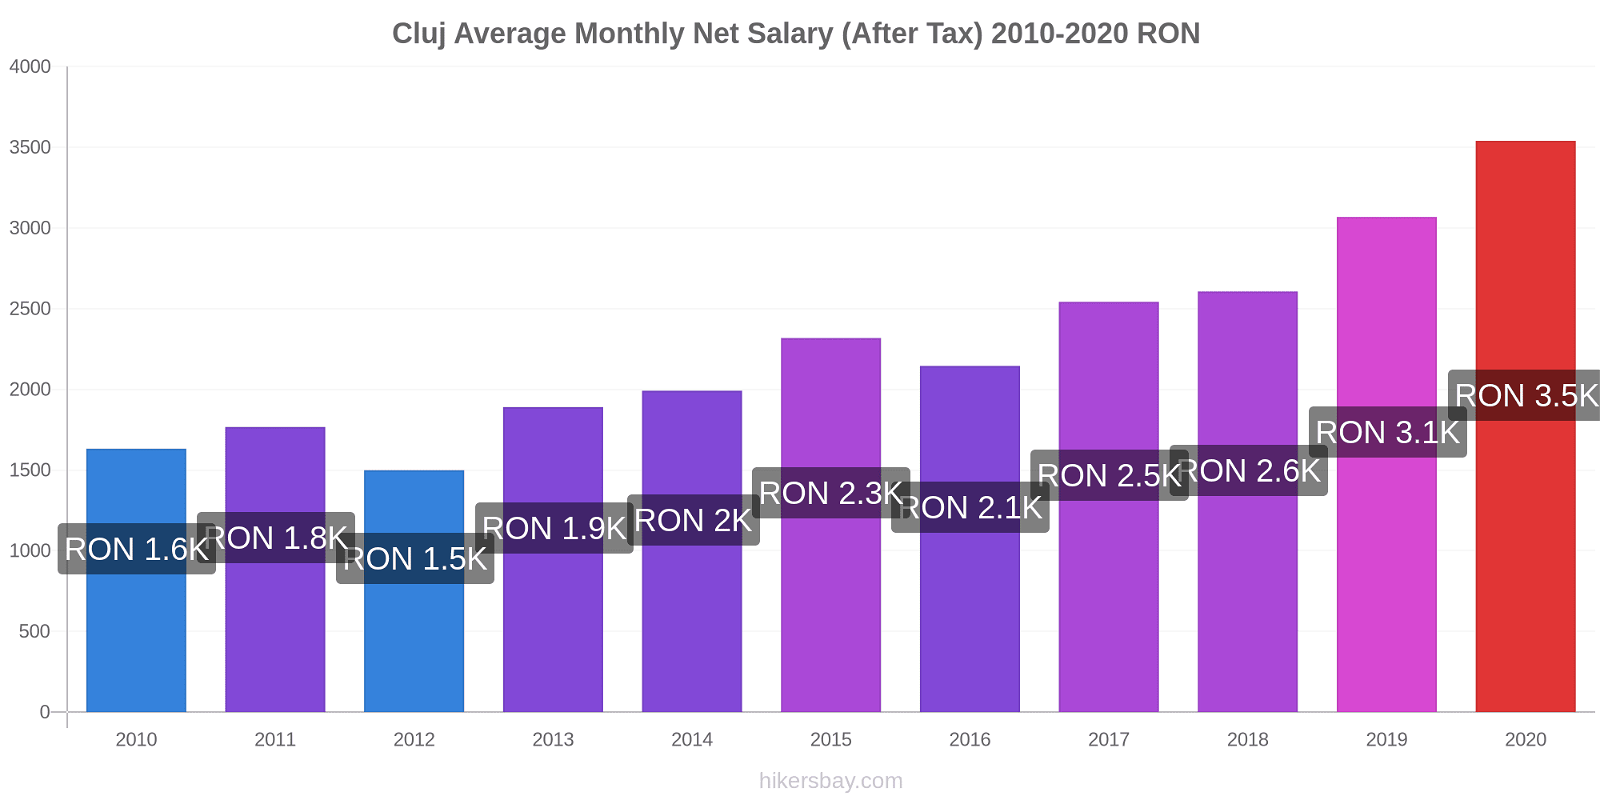 Cluj price changes Average Monthly Net Salary (After Tax) hikersbay.com